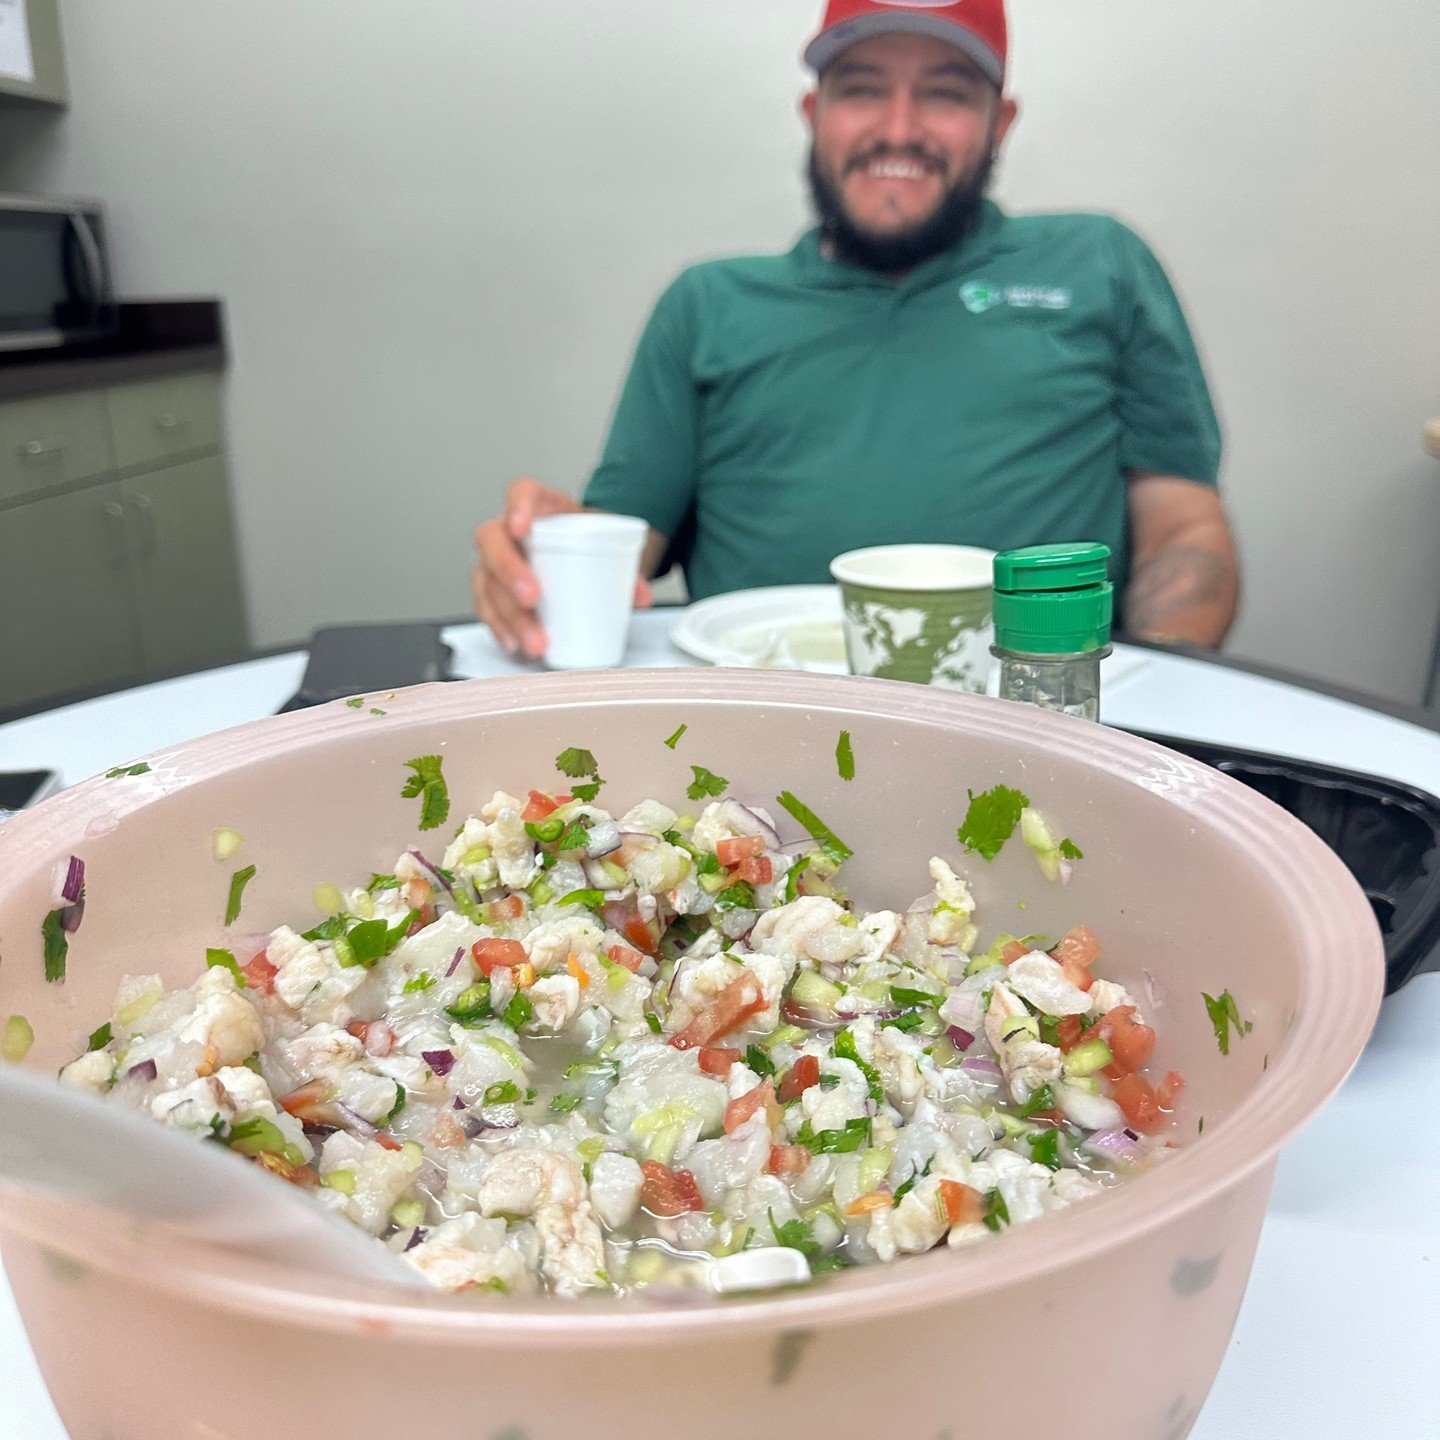 Cornelio Chavez, our amazing driver ambassador, is taking the lead in fighting food waste. Today, he transformed recovered ingredients into fresh ceviche that was shared with the #loavesandfishes team! We take pride in living out our core values and 